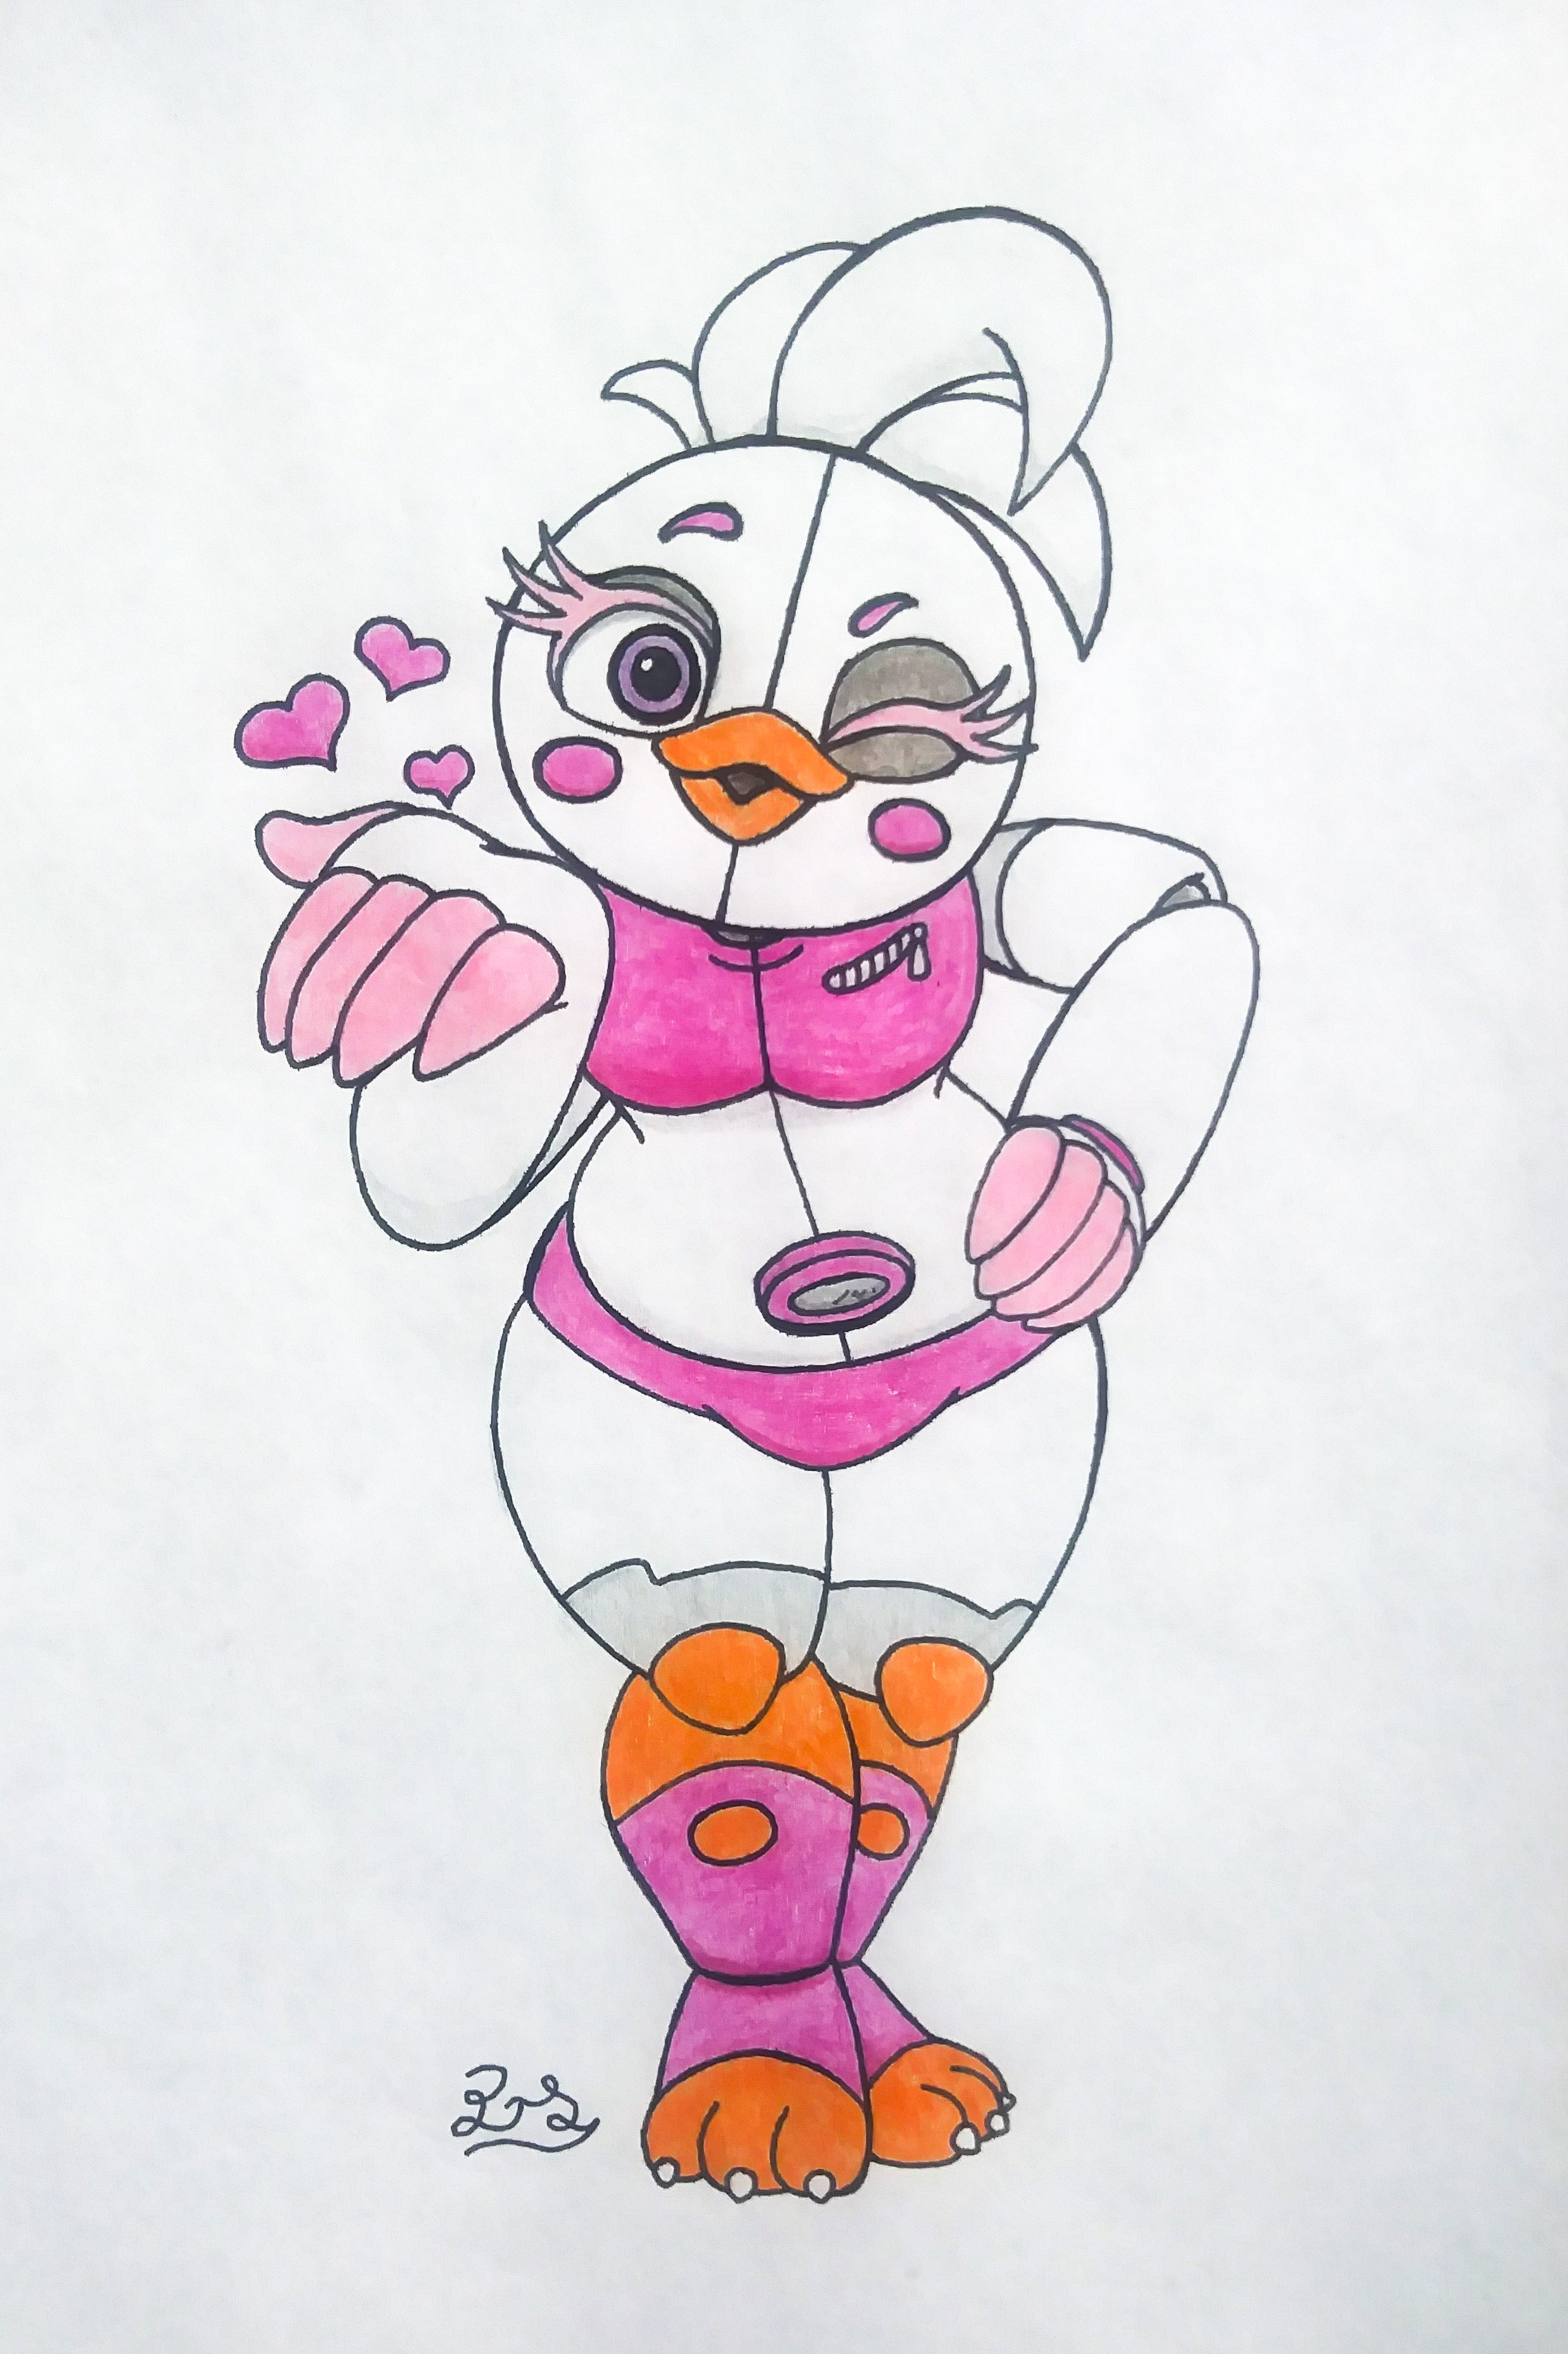 Funtime Chica by PilloTheStar on DeviantArt